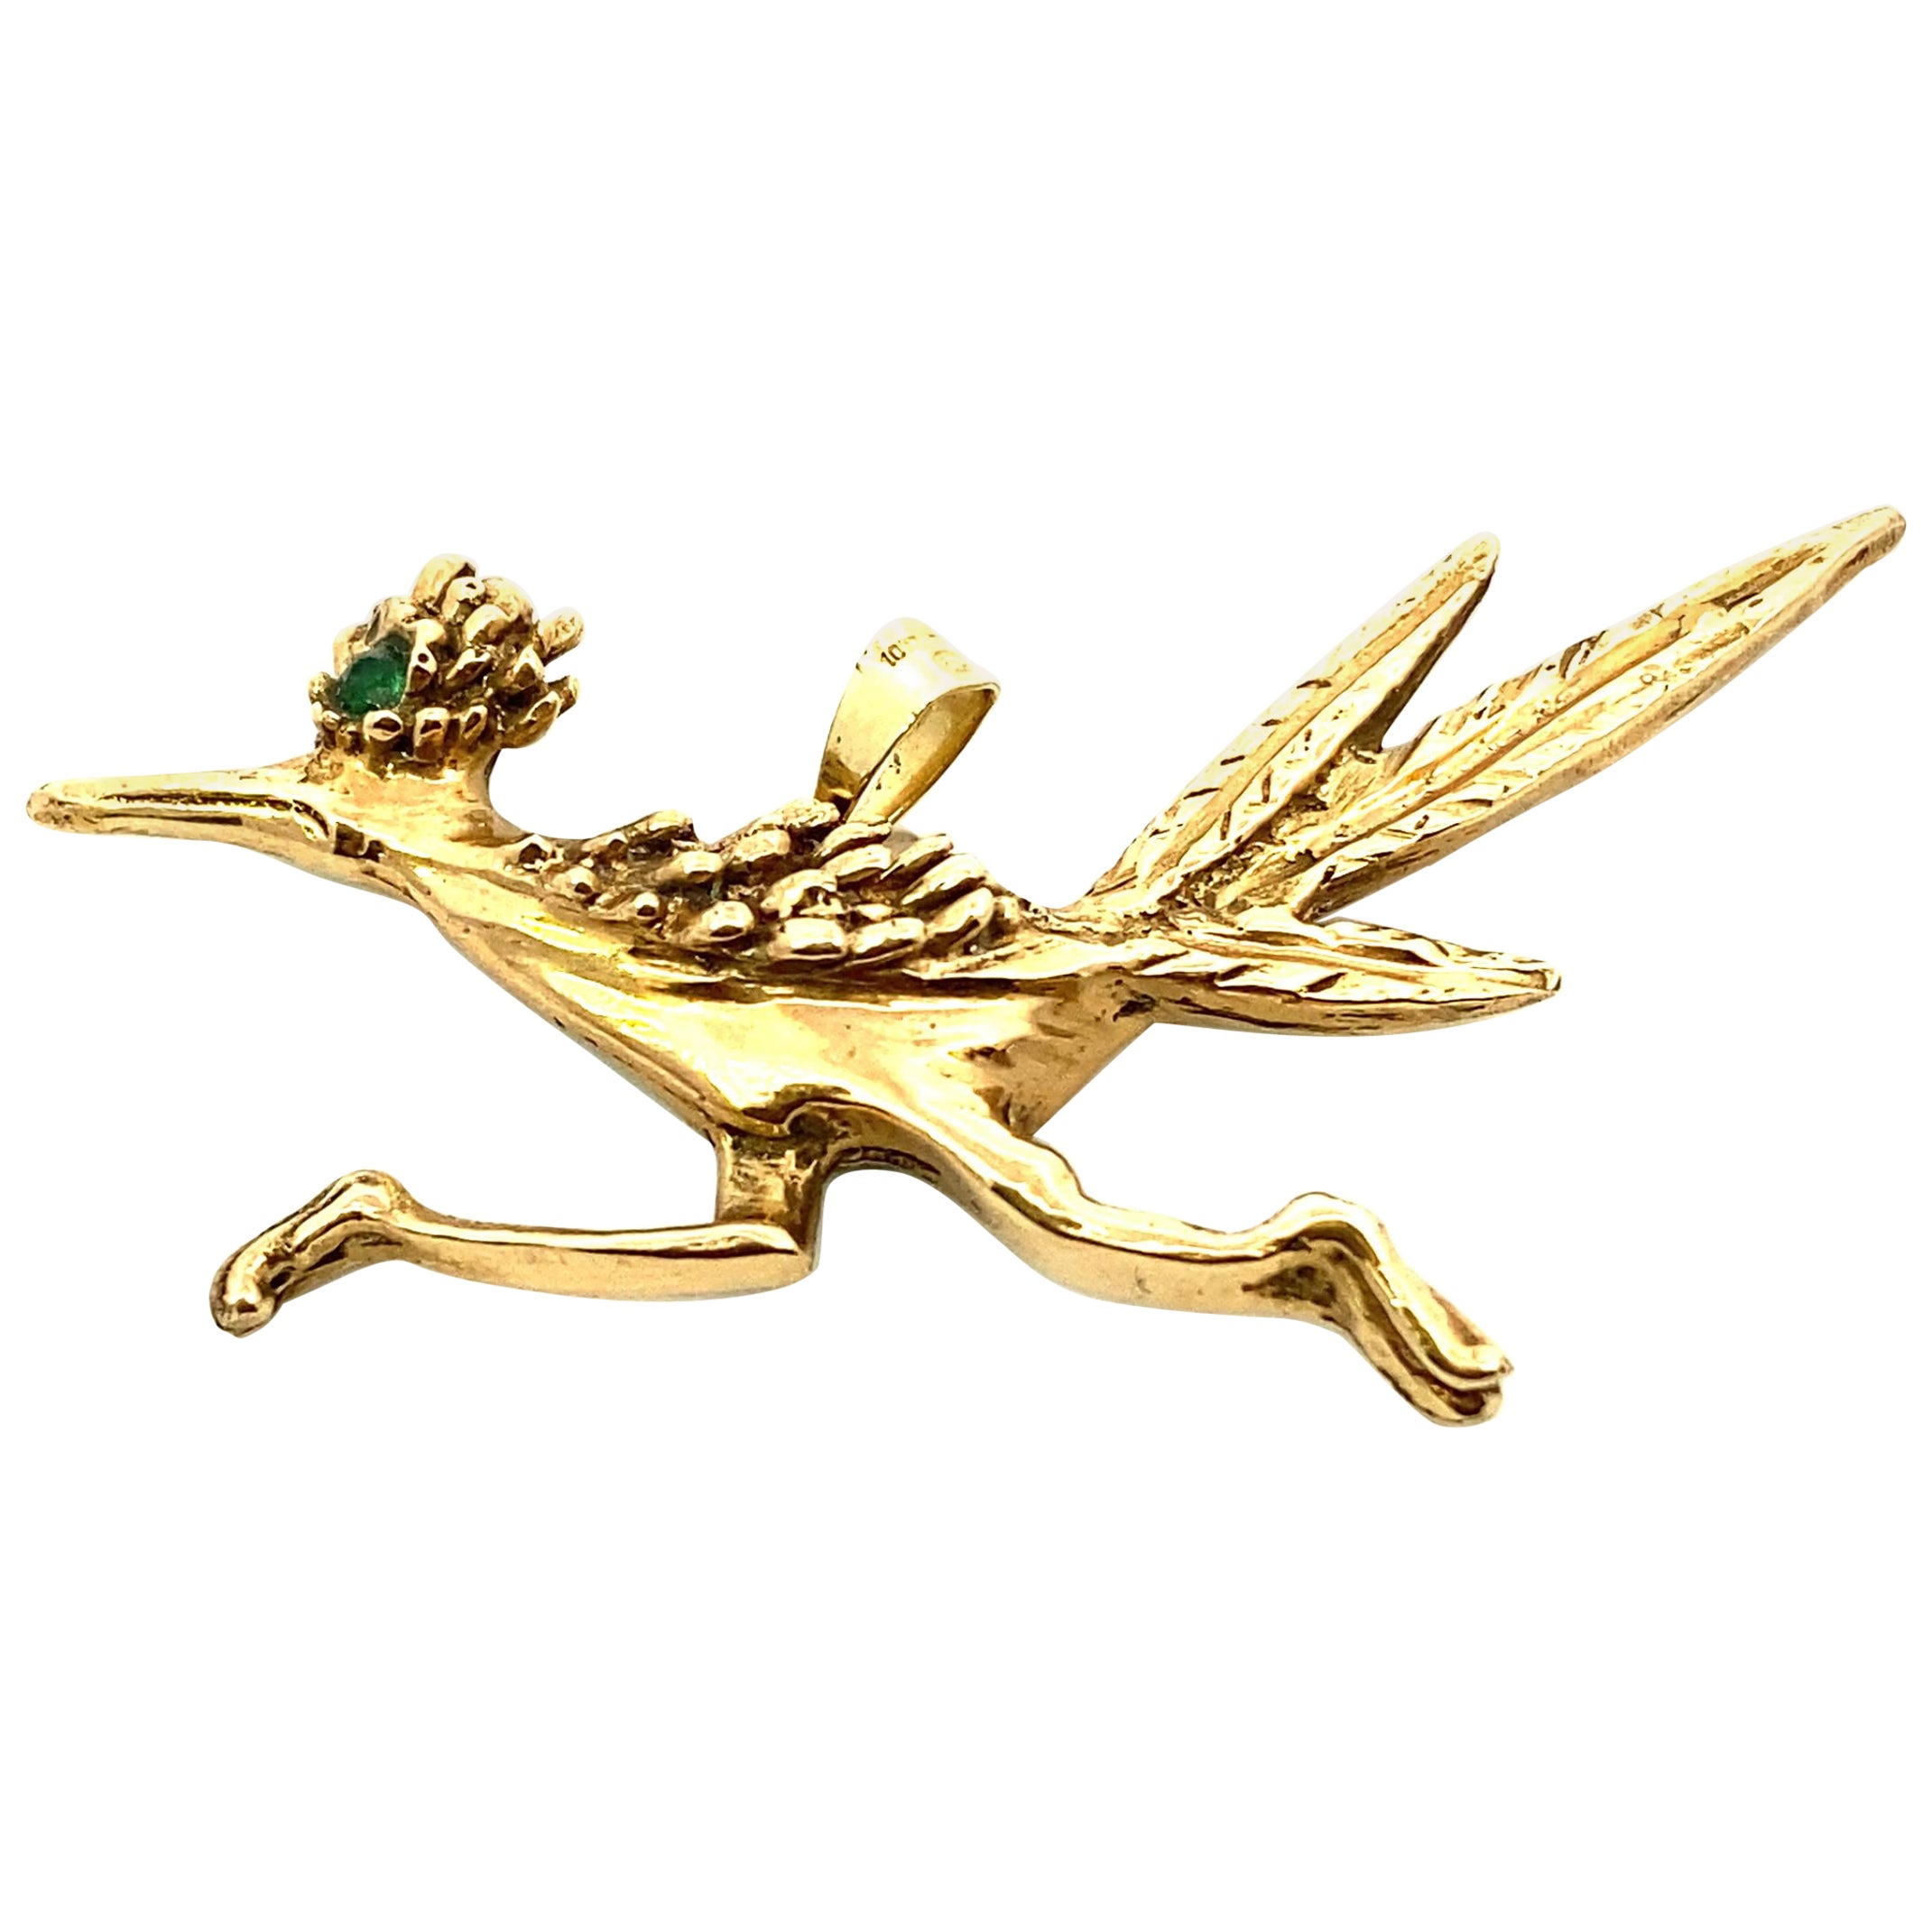 Solid Gold Roadrunner Pendant Charm with Emerald Eye For Sale